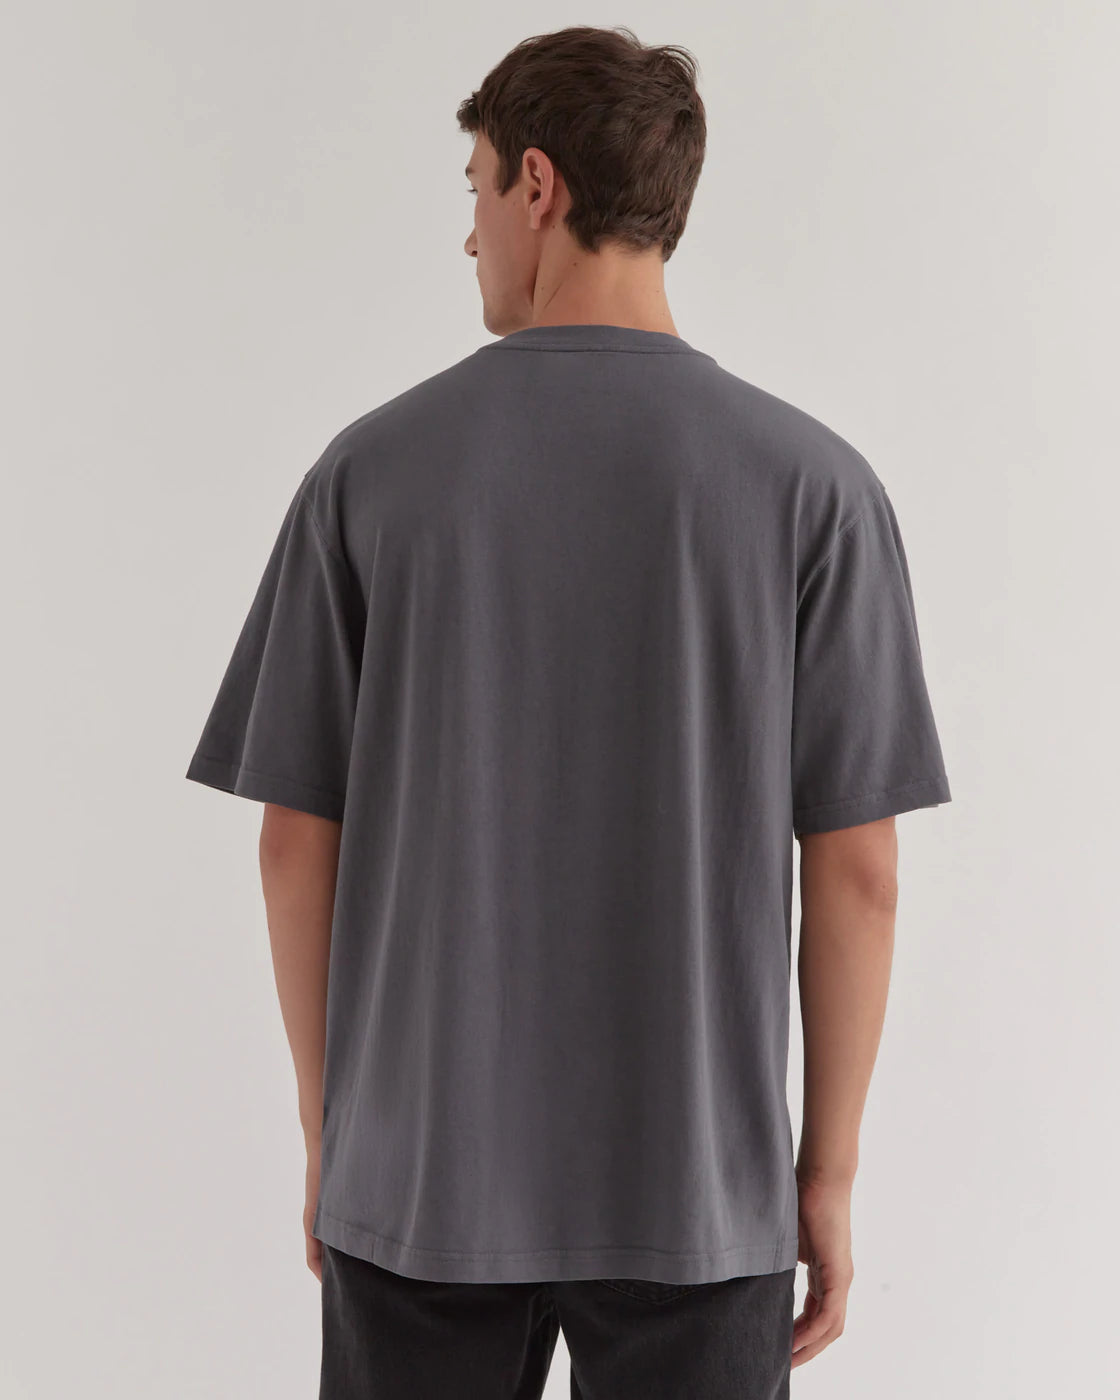 Mens Est Tee Washed Graphite